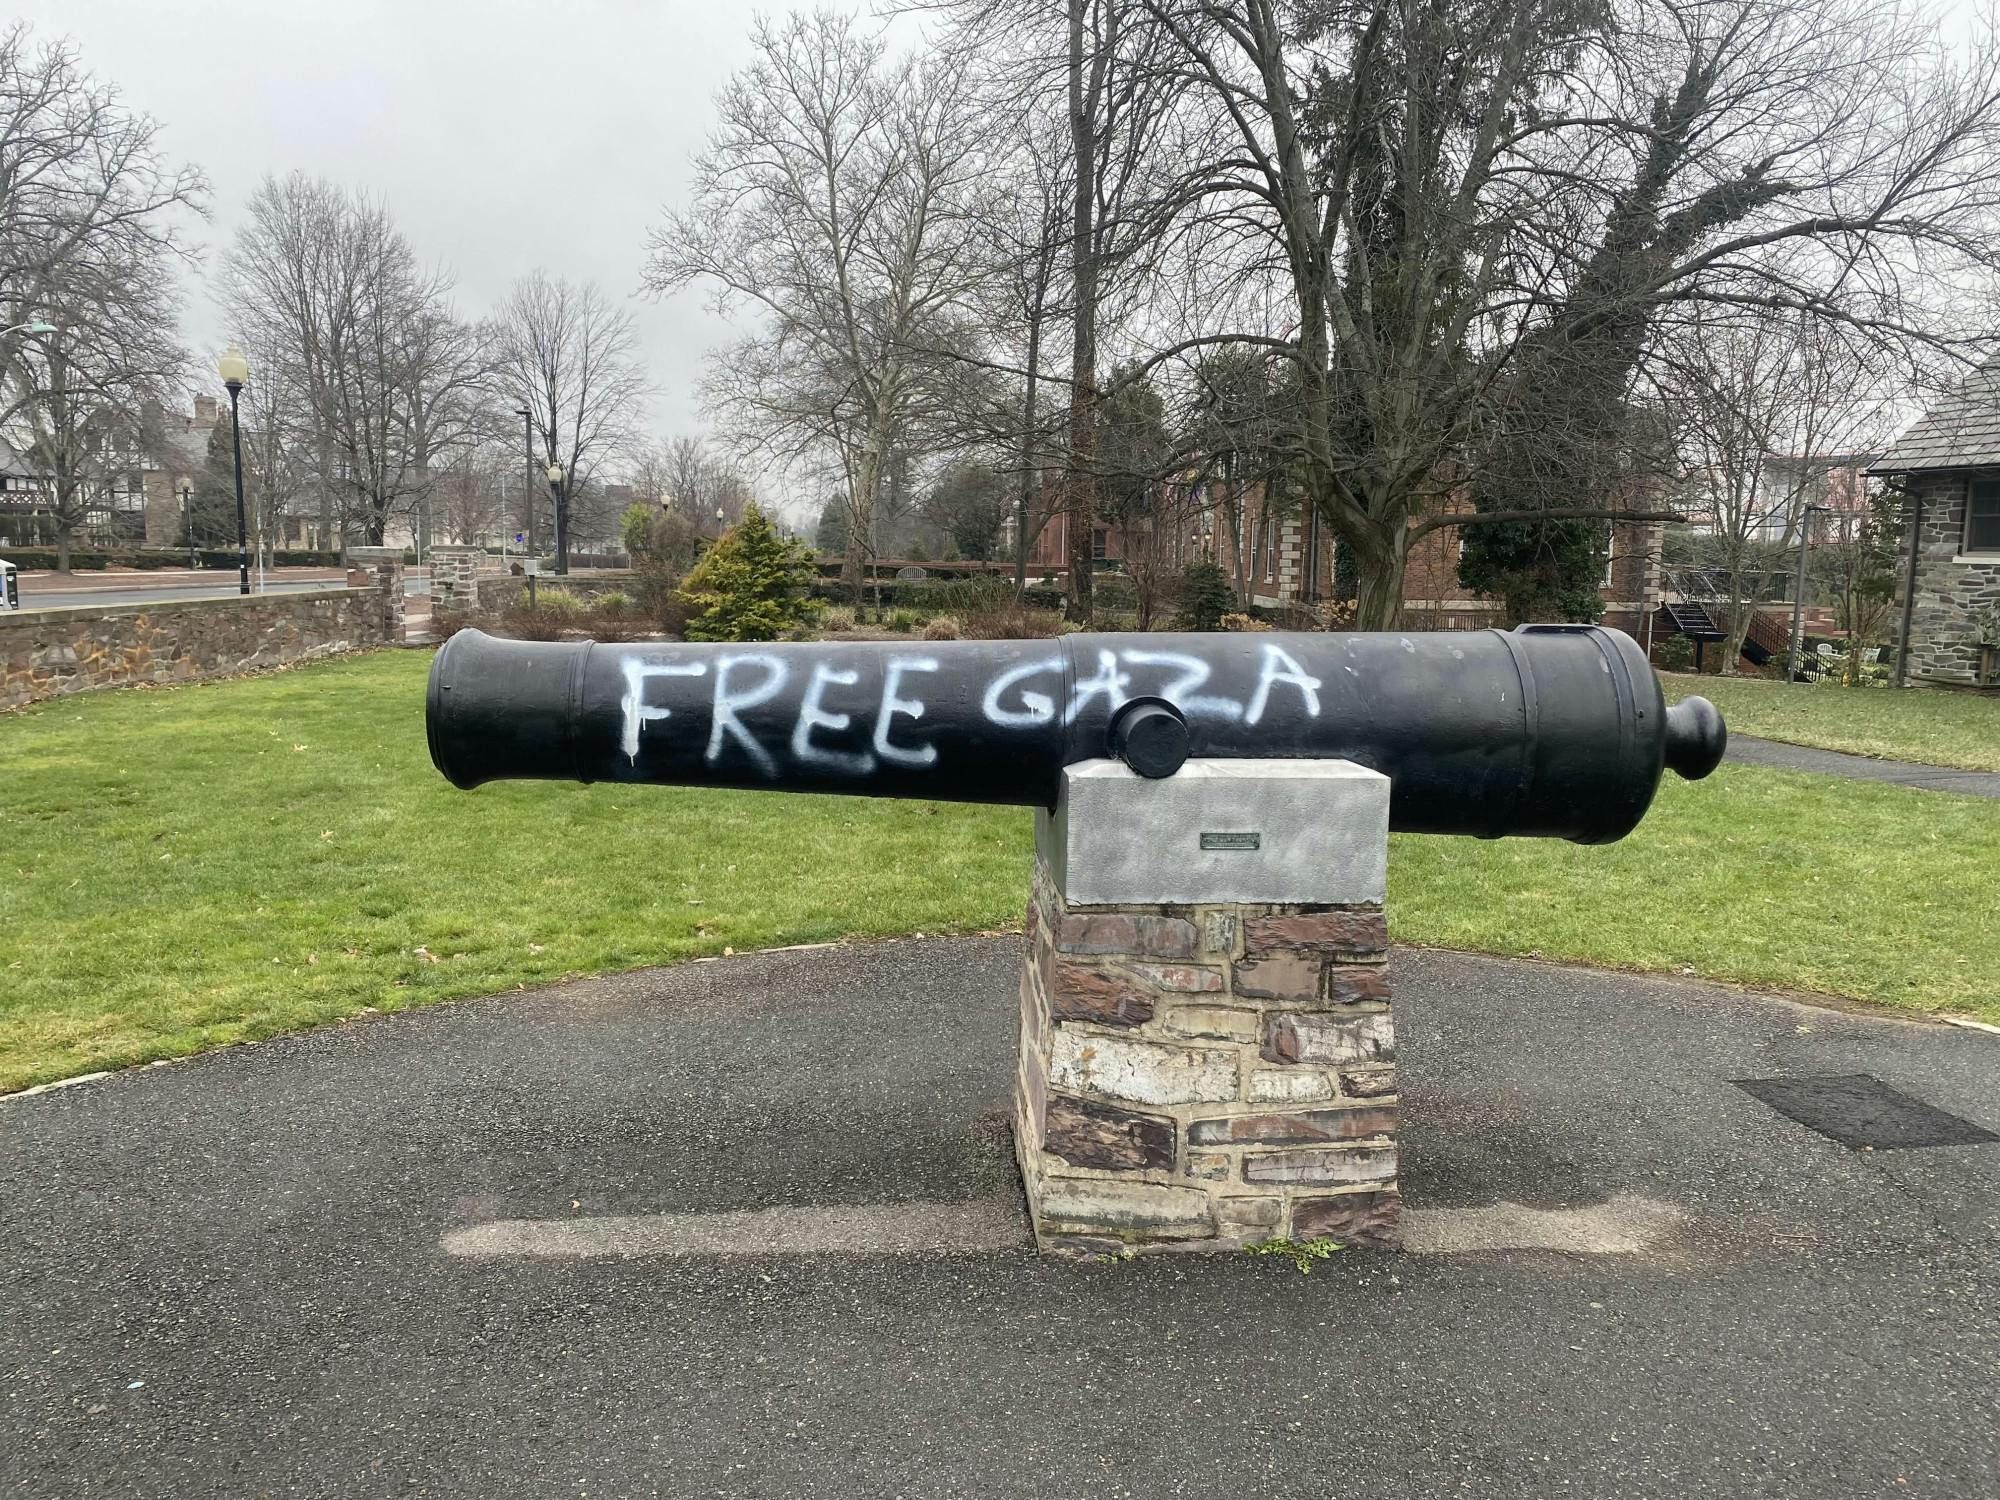 A cannon with the words "Free Gaza" painted on it